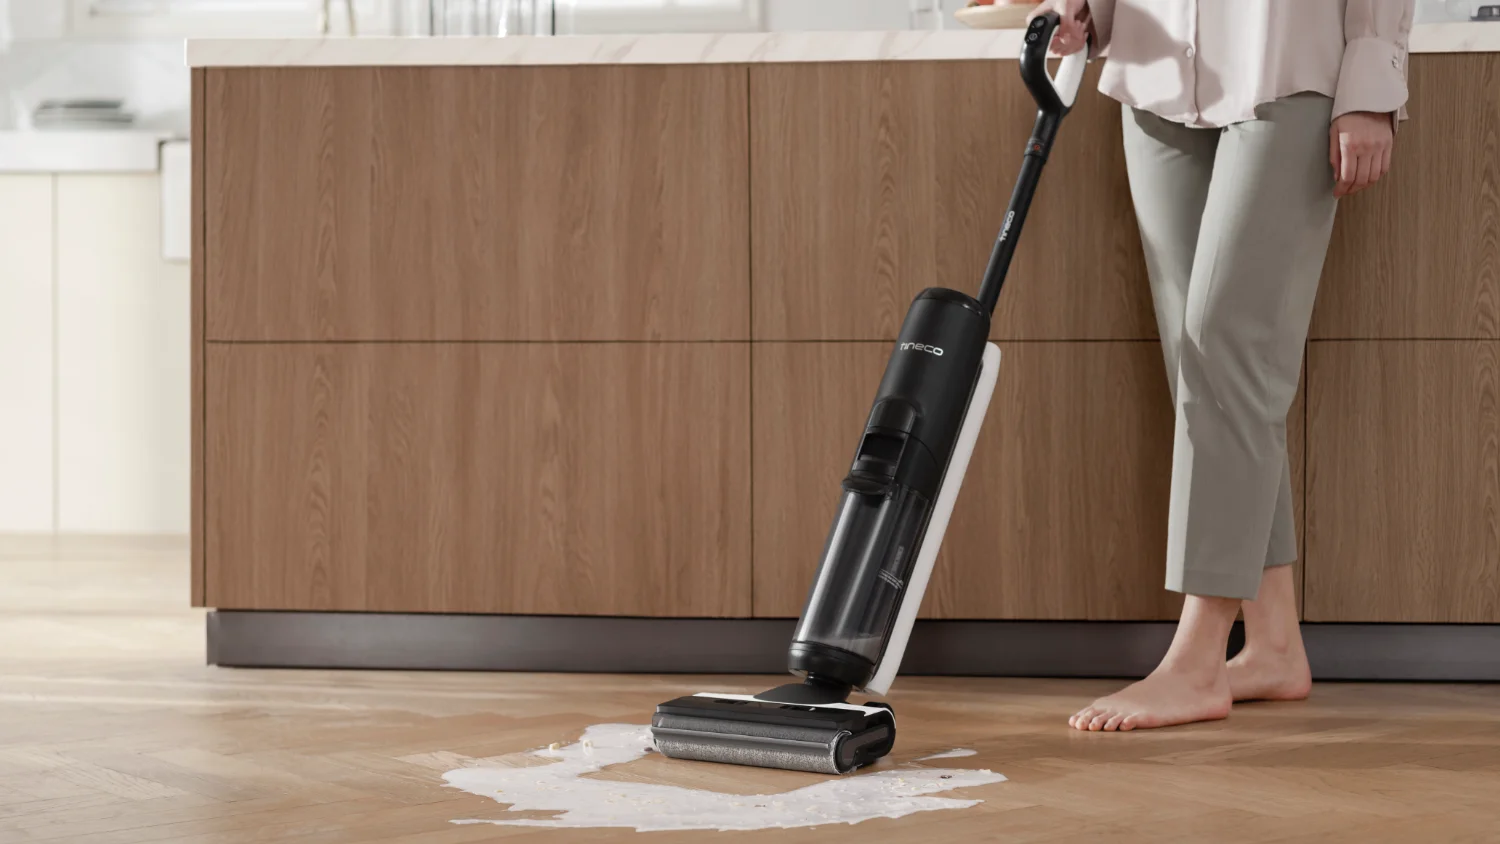 The Tineco Floor One S6 Pro Extreme cleaning up some spilt milk